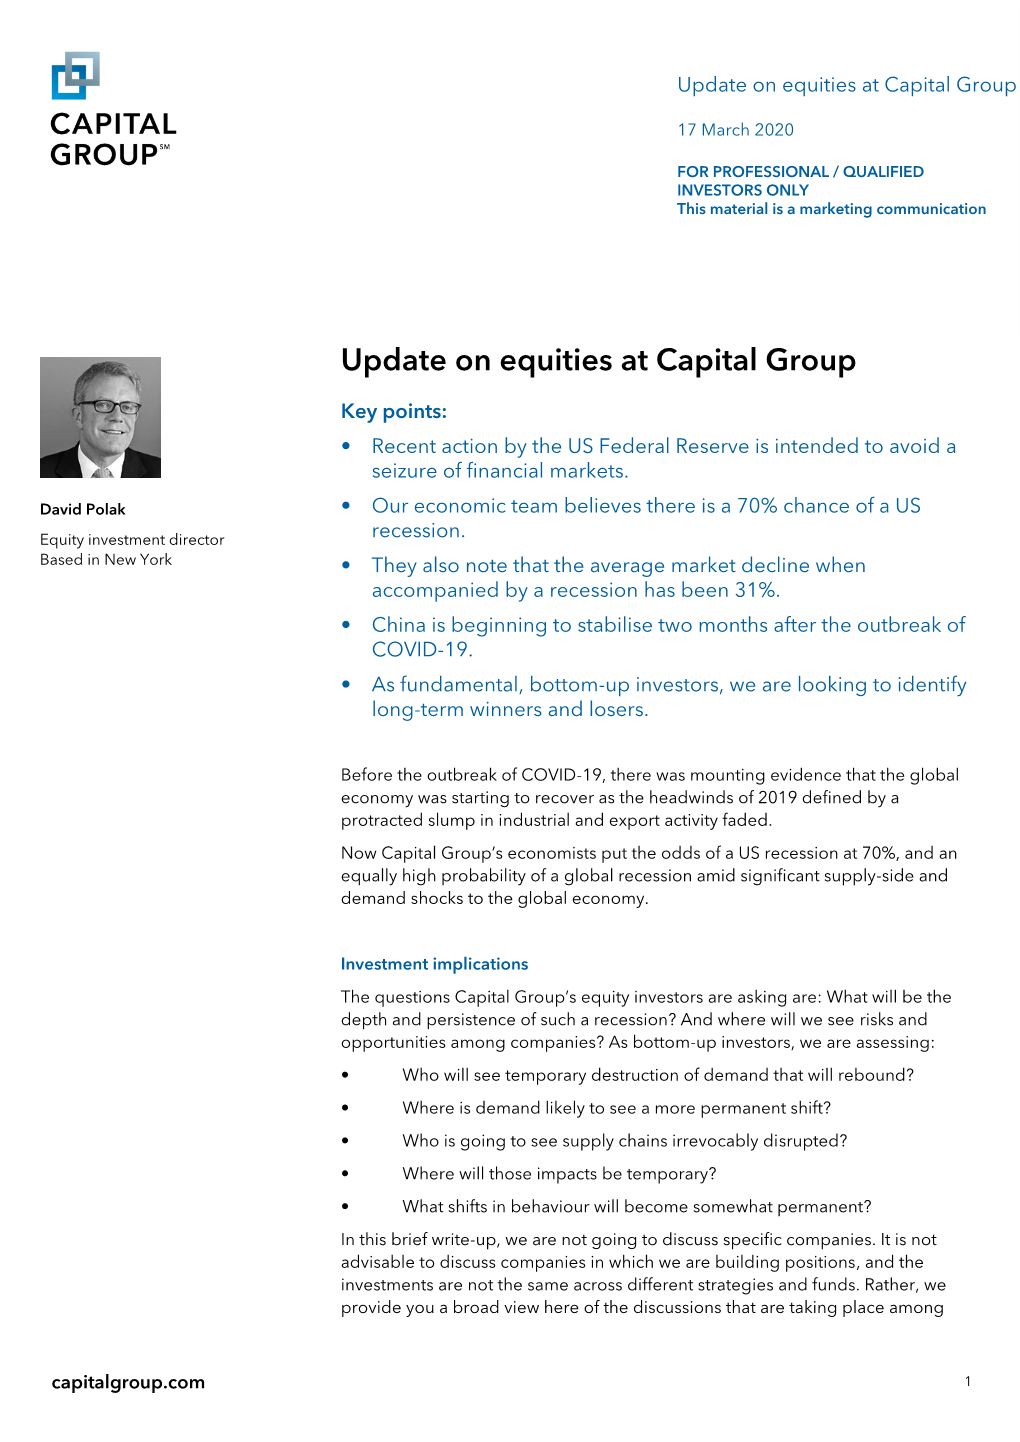 Update on Equities at Capital Group